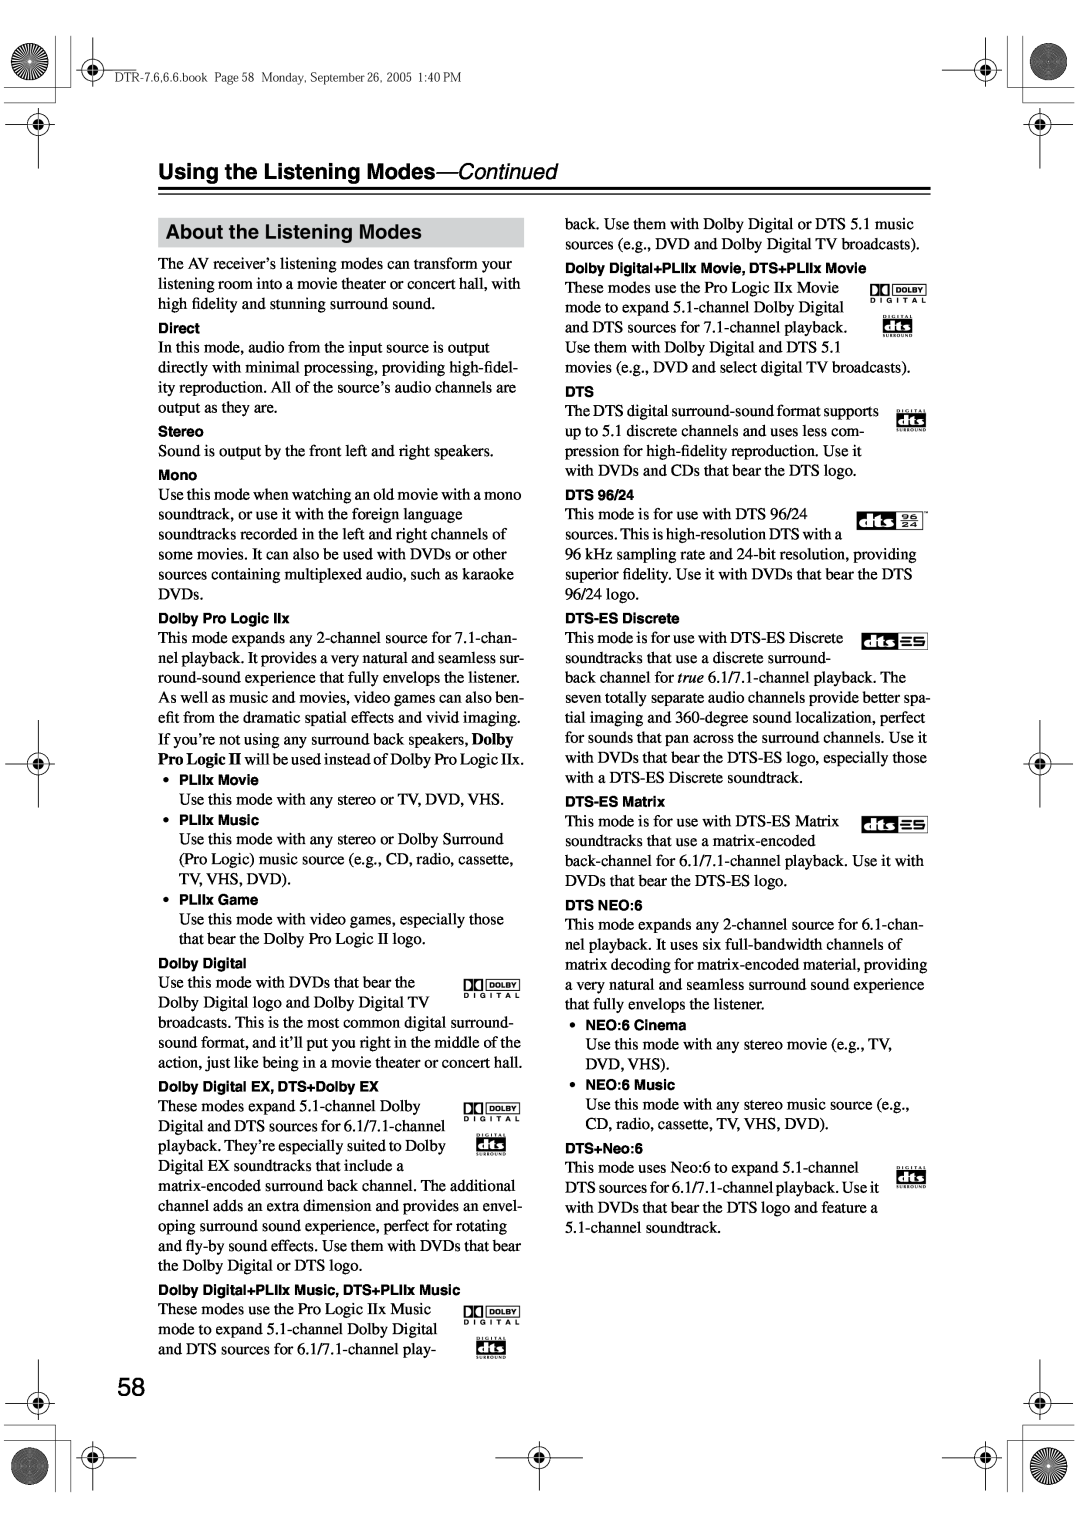 Integra DTR-7.6/6.6 instruction manual About the Listening Modes, Using the Listening Modes-Continued 